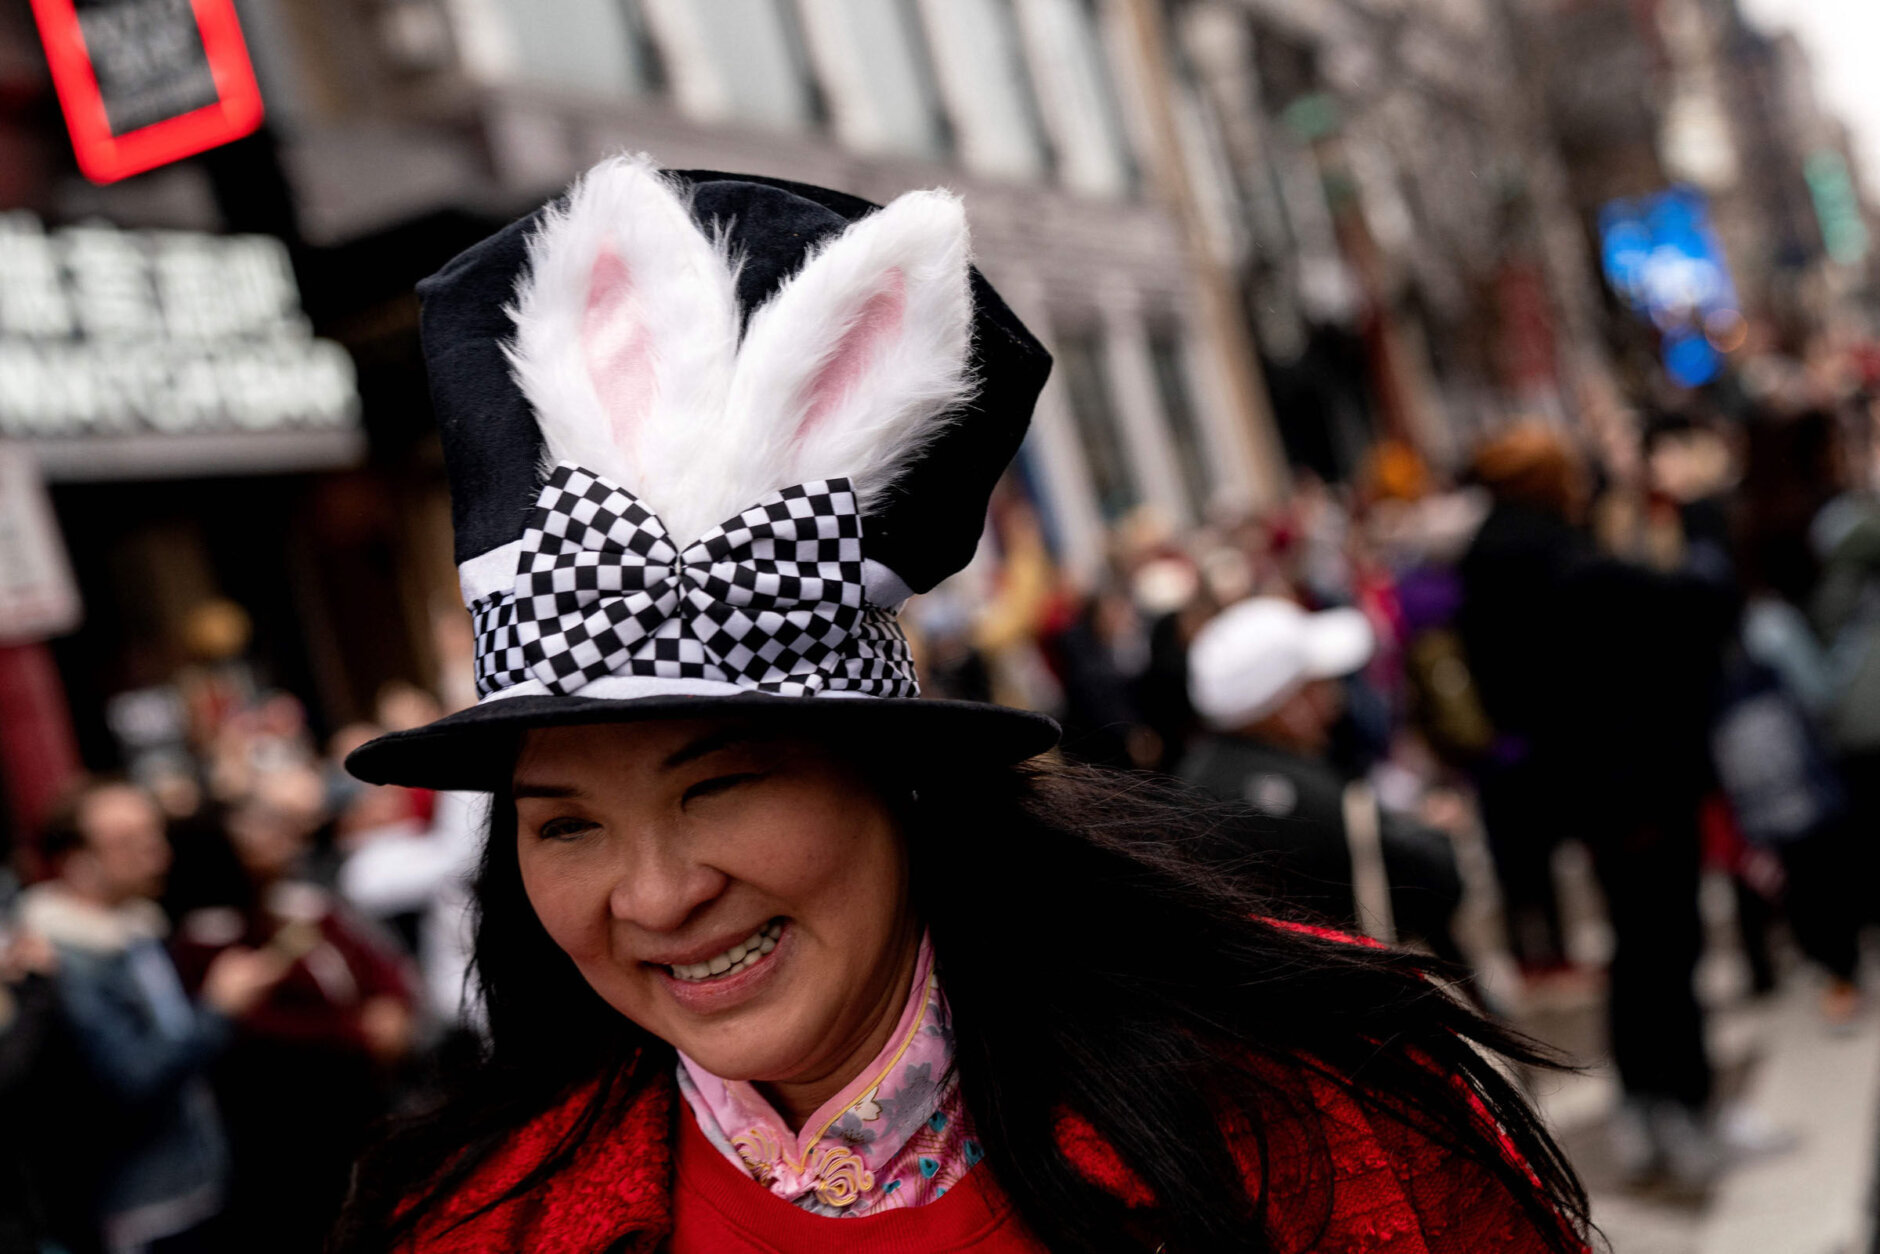 A participant wears rabbit ears during the Lunar New Year Parade in the Chinatown neighborhood of Washington, DC, on January 22, 2023. - 2023 is the year of the rabbit in the Chinese horoscope. (Photo by Stefani Reynolds / AFP) (Photo by STEFANI REYNOLDS/AFP via Getty Images)